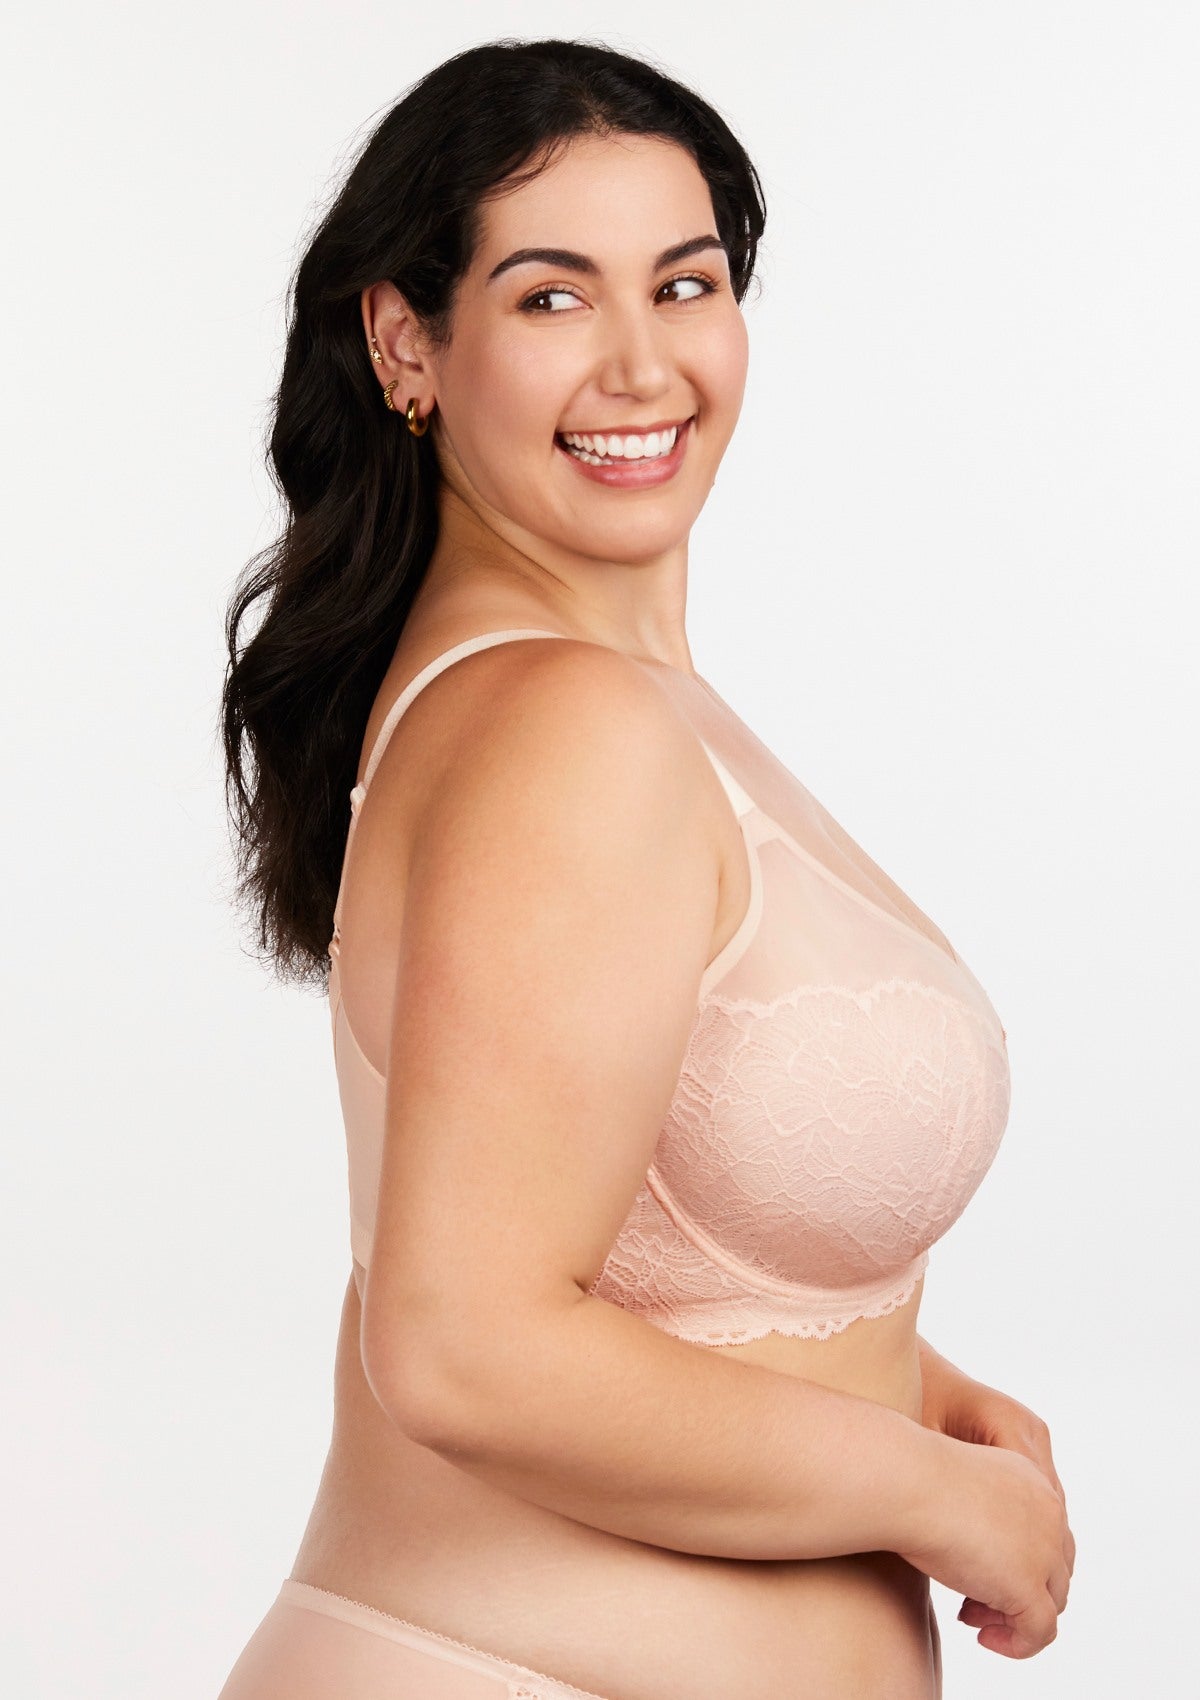 HSIA Blossom Sheer Lace Bra: Comfortable Underwire Bra For Big Busts - White / 38 / G